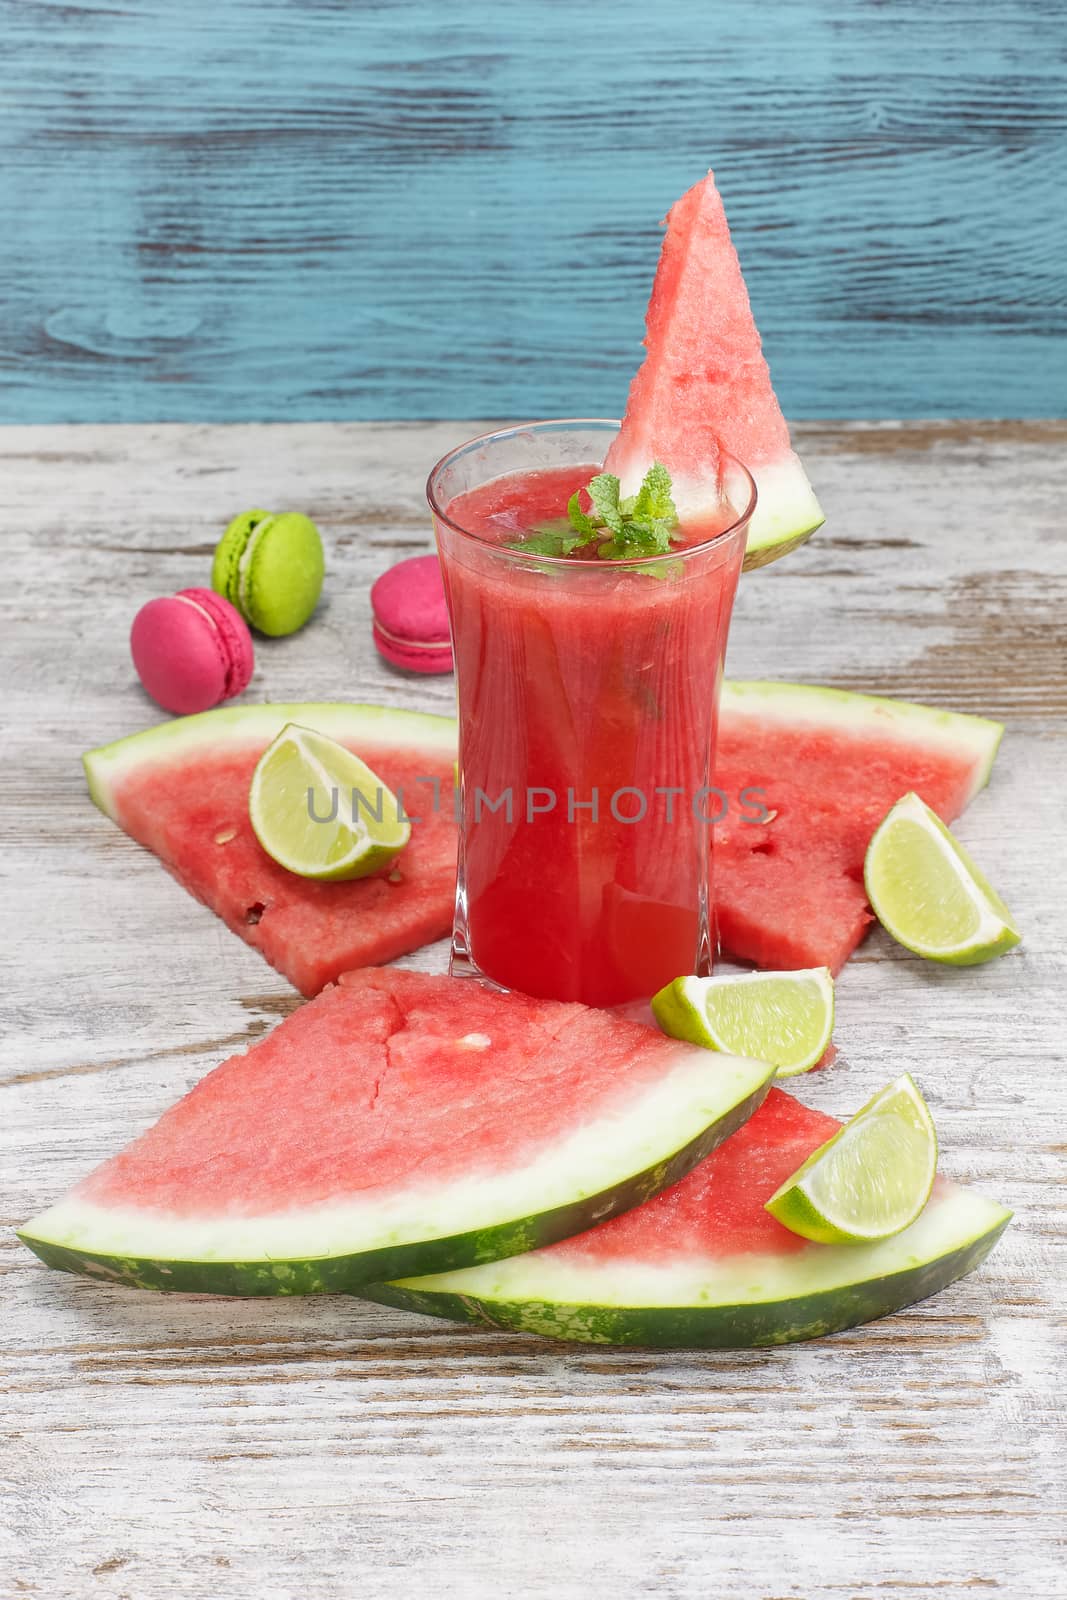 Healthy organic watermelon snack. Wooden background.